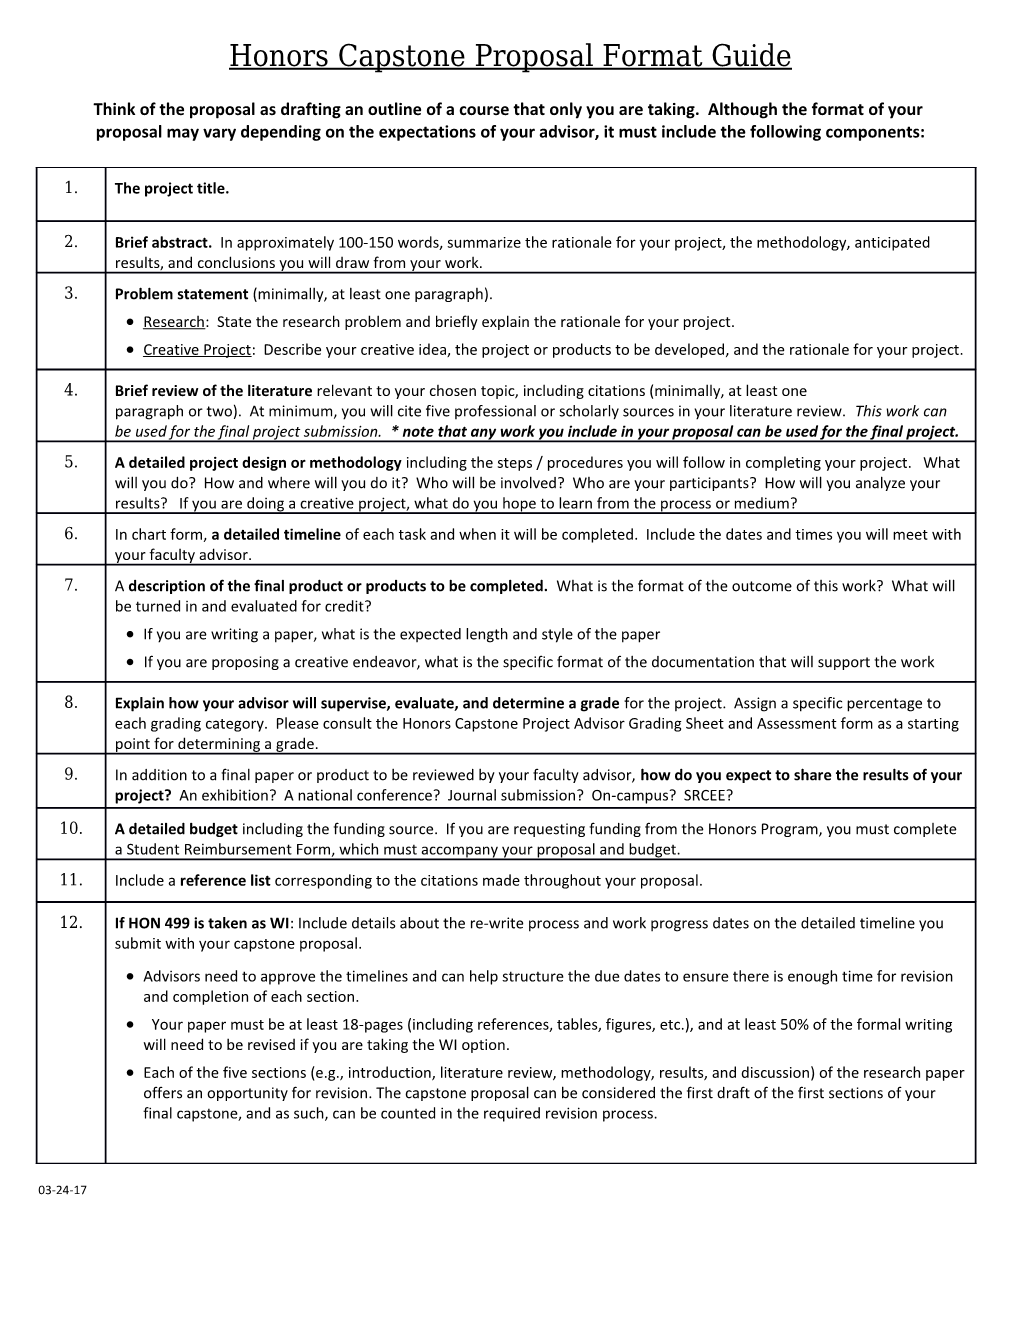 Honors Capstone Proposal Format Guide Think of the Proposal As Drafting an Outline of A